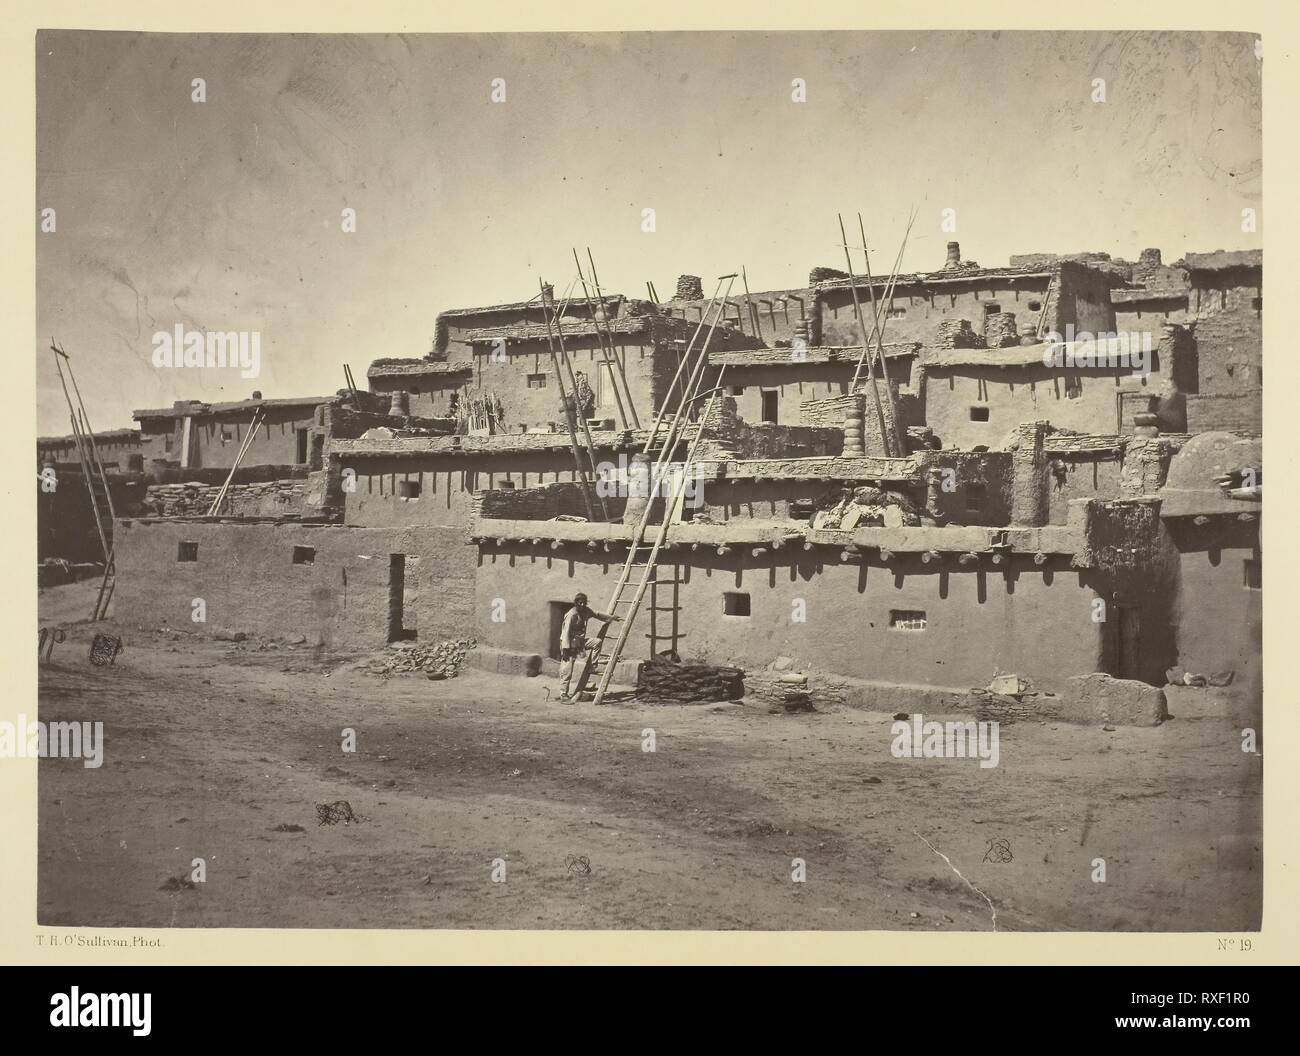 Section of the South Side of Zuni Pueblo, N.M. Timothy O'Sullivan; American, born Ireland, 1840-1882. Date: 1873. Dimensions: 20 x 27.4 cm (image/paper); 38.2 x 49.8 cm (album page). Albumen print, from the album 'Geographical & Geological Explorations & Surveys West of the 100th Meridian,' vol. 2. Origin: United States. Museum: The Chicago Art Institute. Stock Photo